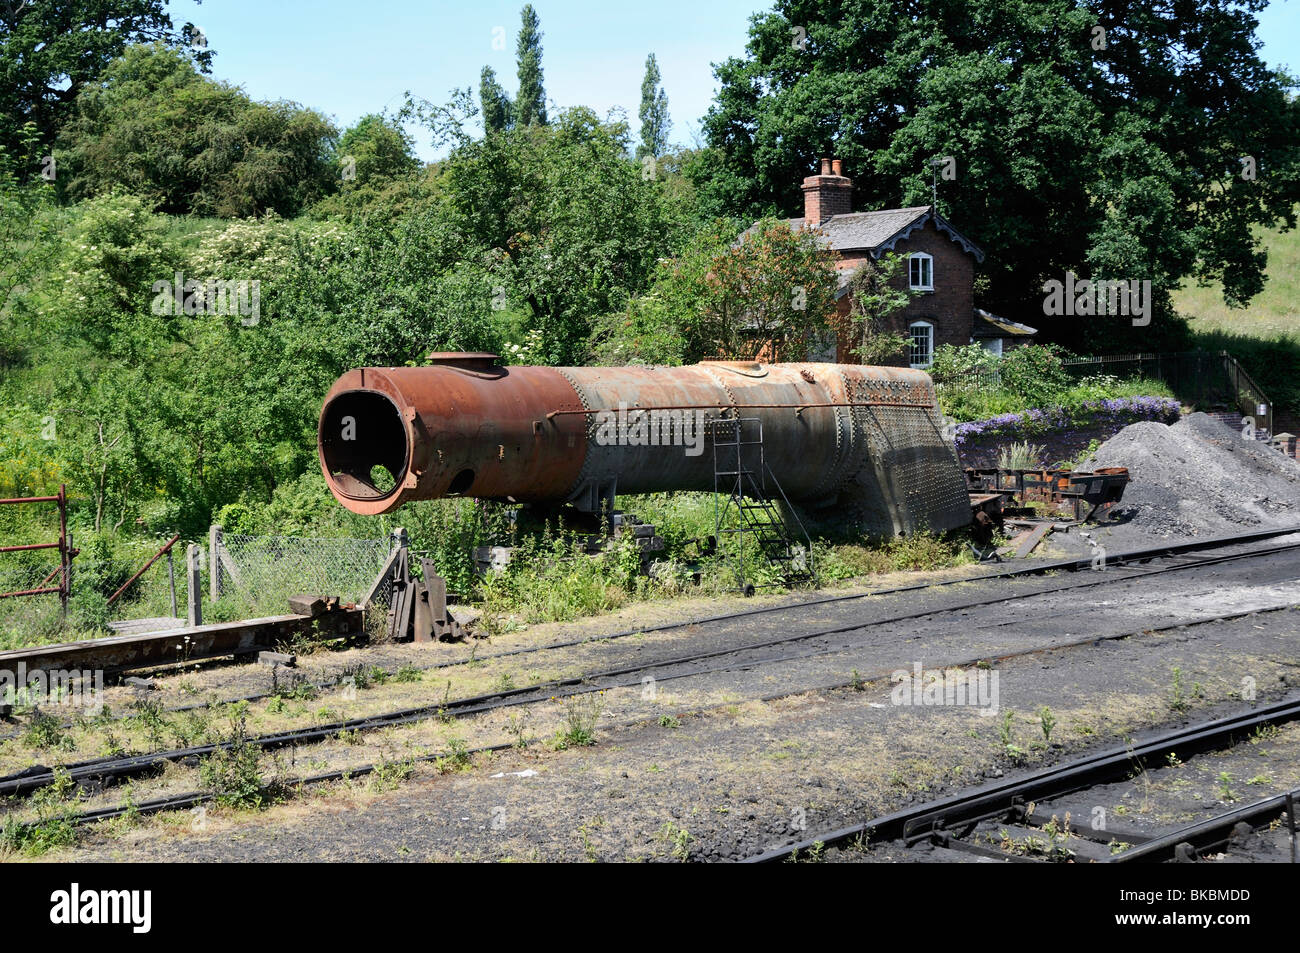 An old boiler removed from a steam locomotive waits to be repaired at the side of the railway tracks in the countryside Stock Photo